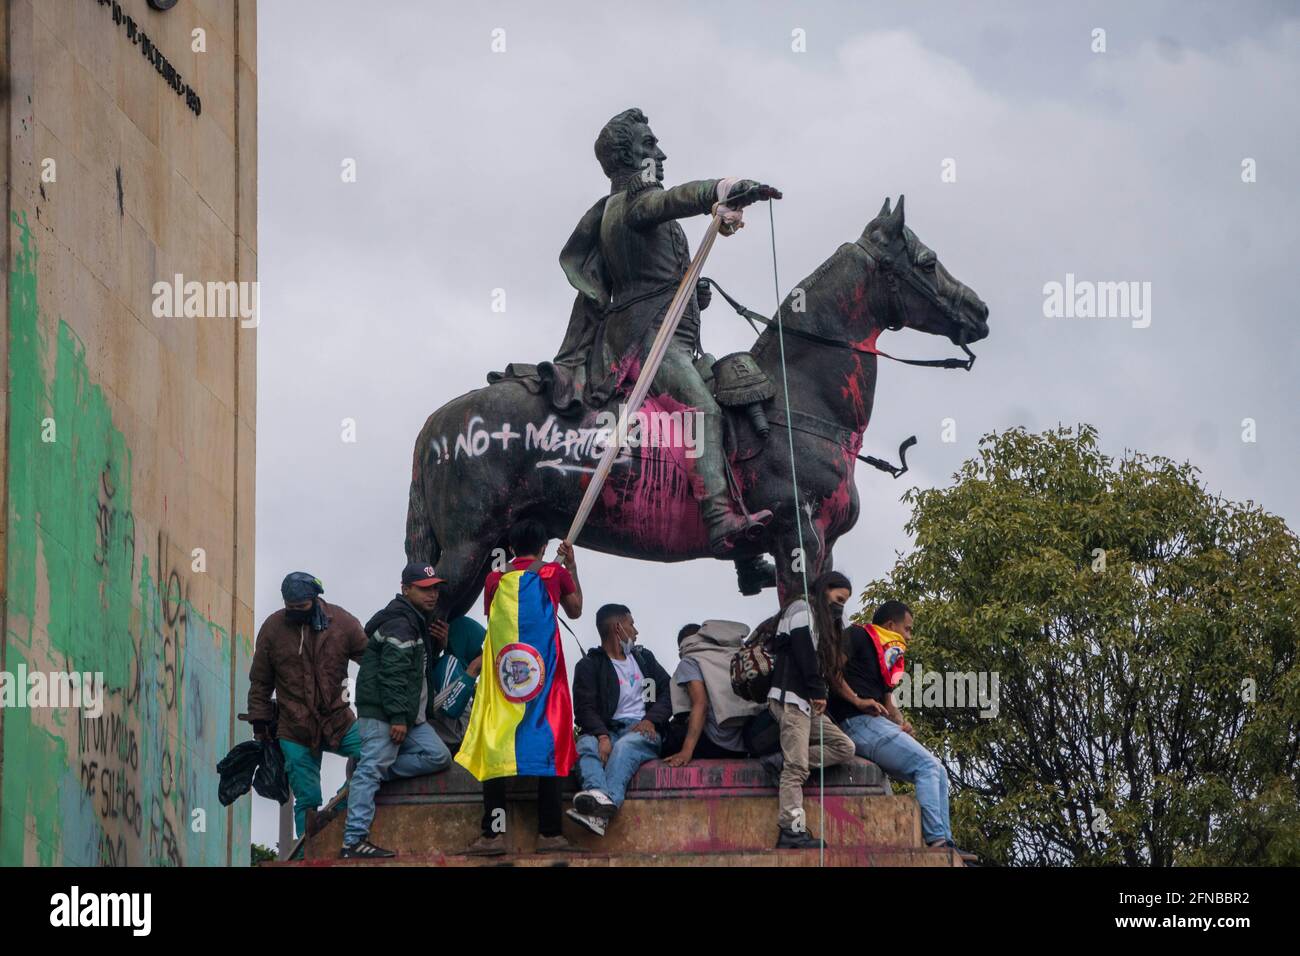 Bogota, Colombia. 15th May, 2021. People at the monument to the Heroes in the protest on day 18 of the national strike in Bogota Credit: Daniel Garzon Herazo/ZUMA Wire/Alamy Live News Stock Photo